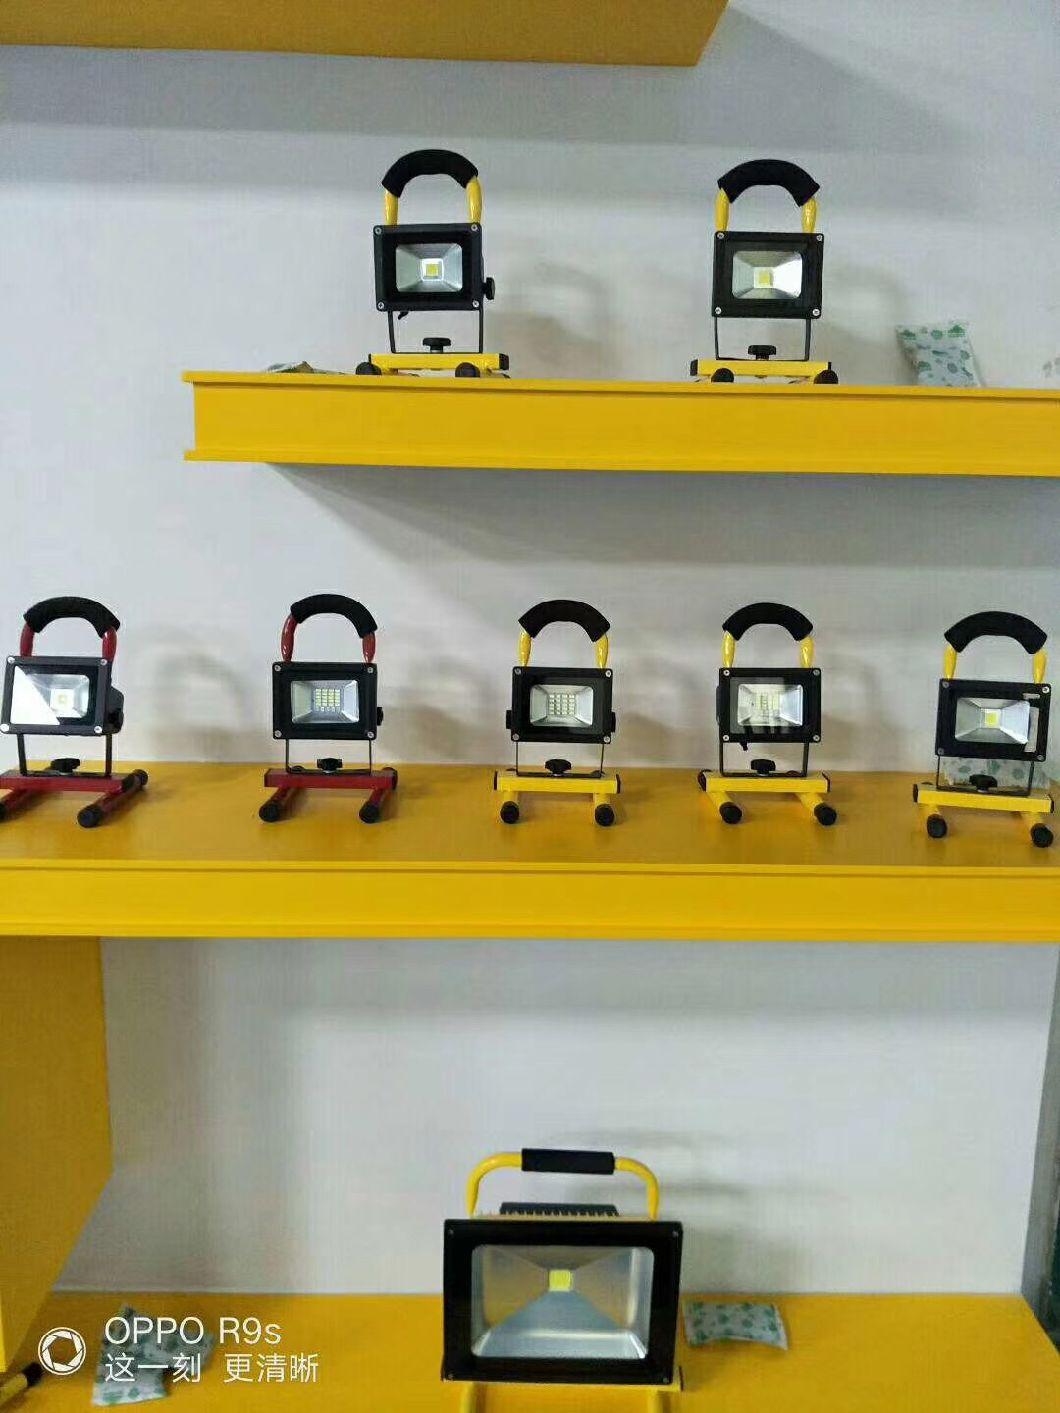 220V 50W Factory Supply Rechargeable Floodlight